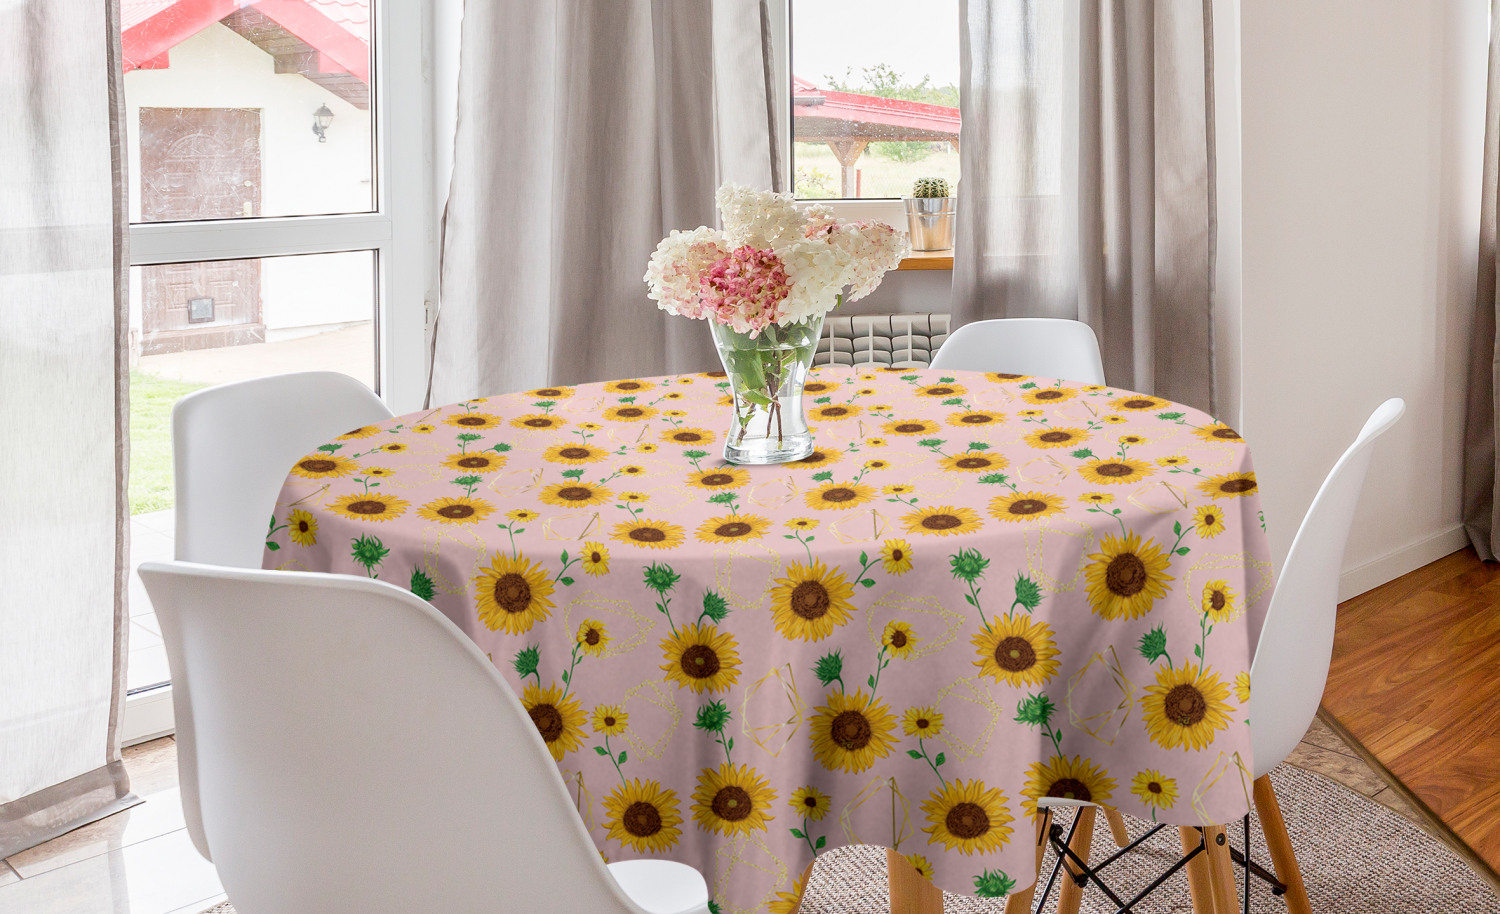 Round and Banquet Sizes 60 Inch x 84 Inch Spring Flower Printed Fabric Tablecloth: Assorted Square 